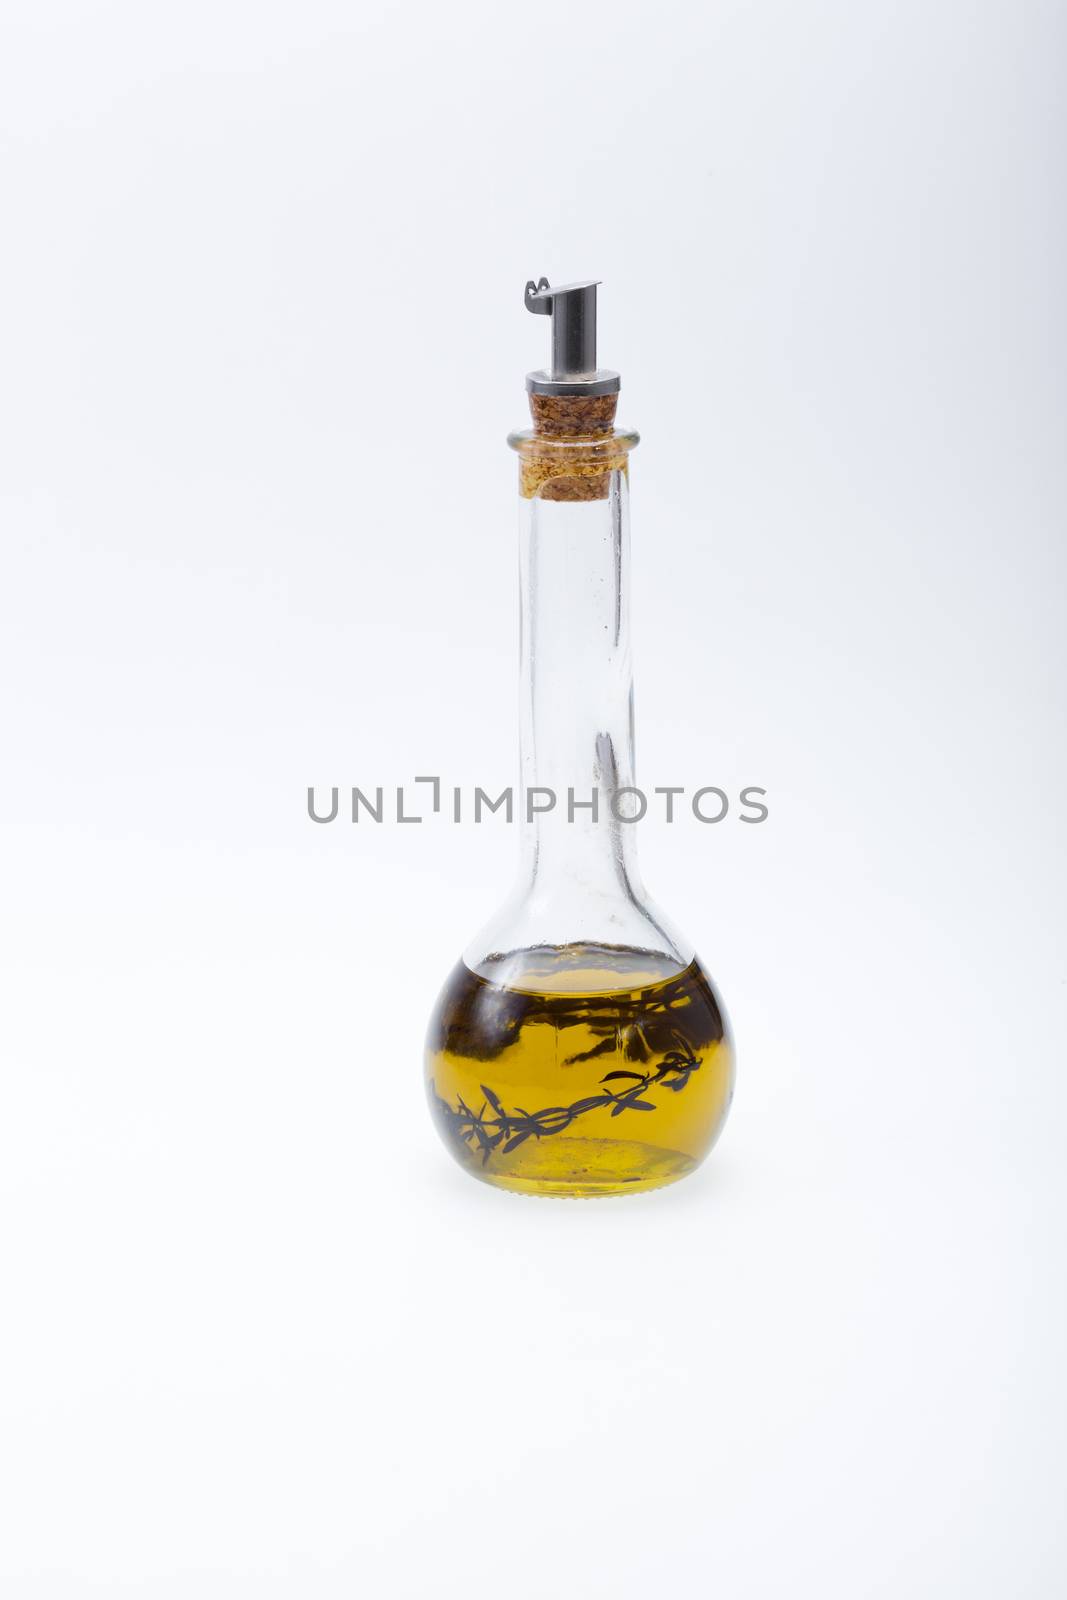 Thyme infused olive oil over white background 